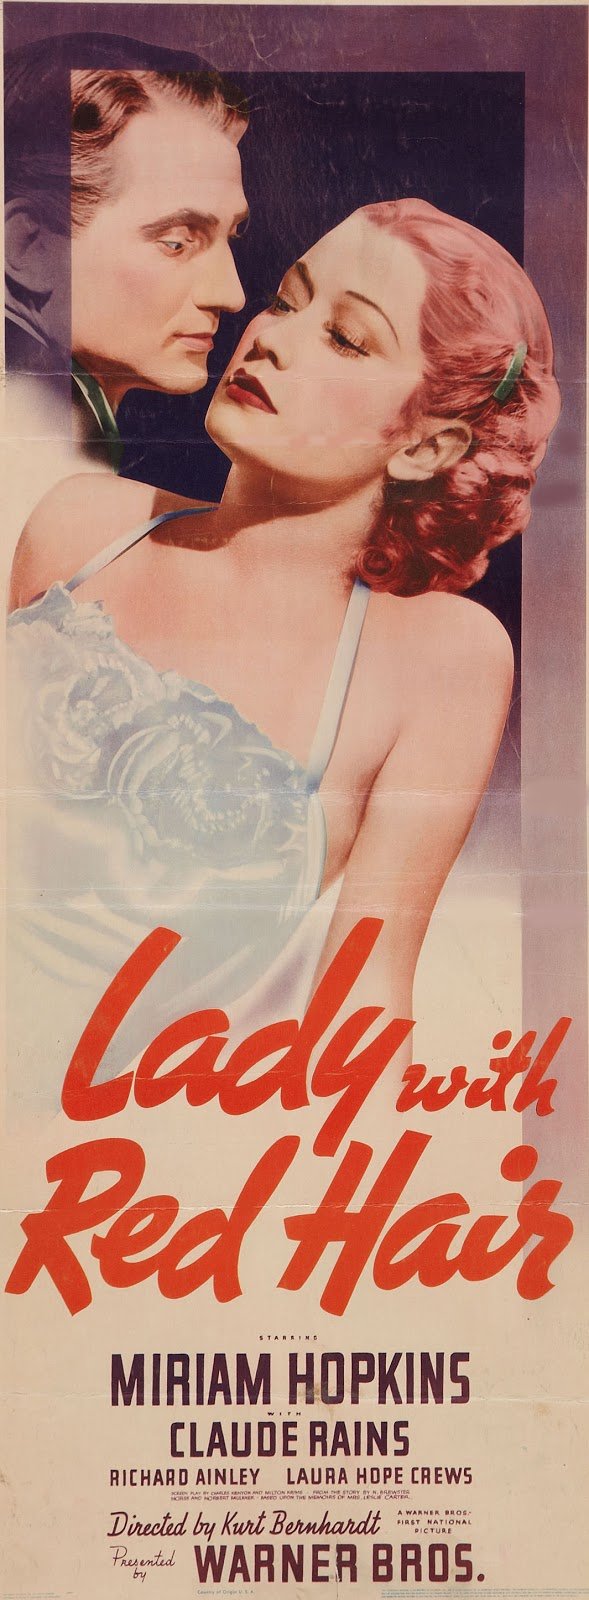 Lady with Red Hair (1940) Screenshot 5 